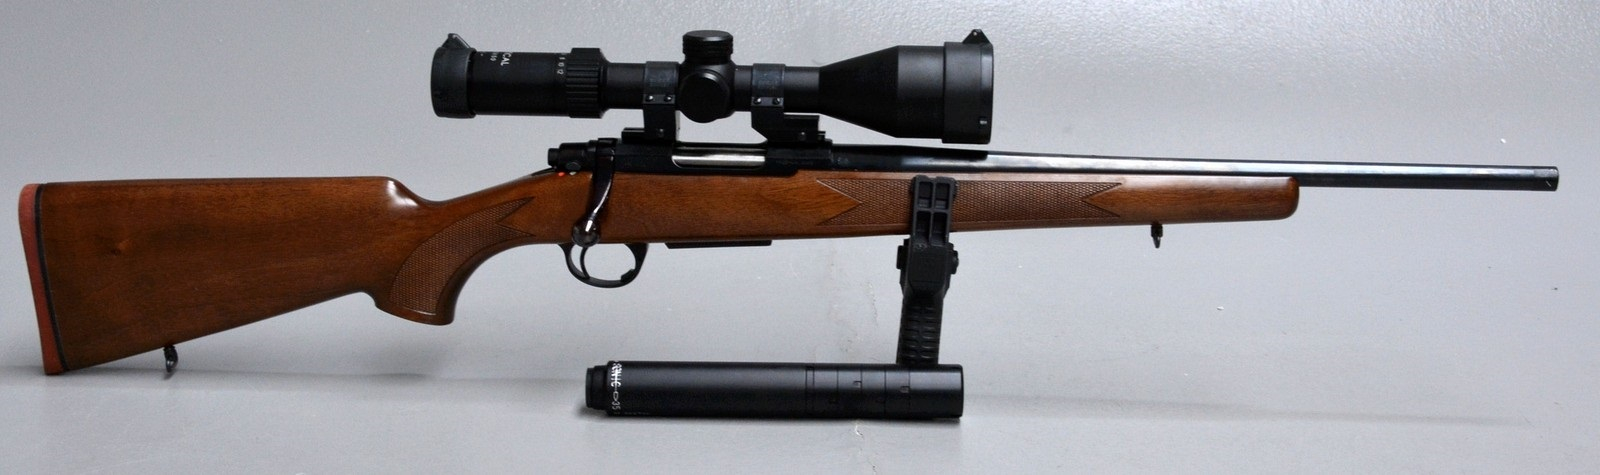 Sabatti Rover 600 chambered for .223